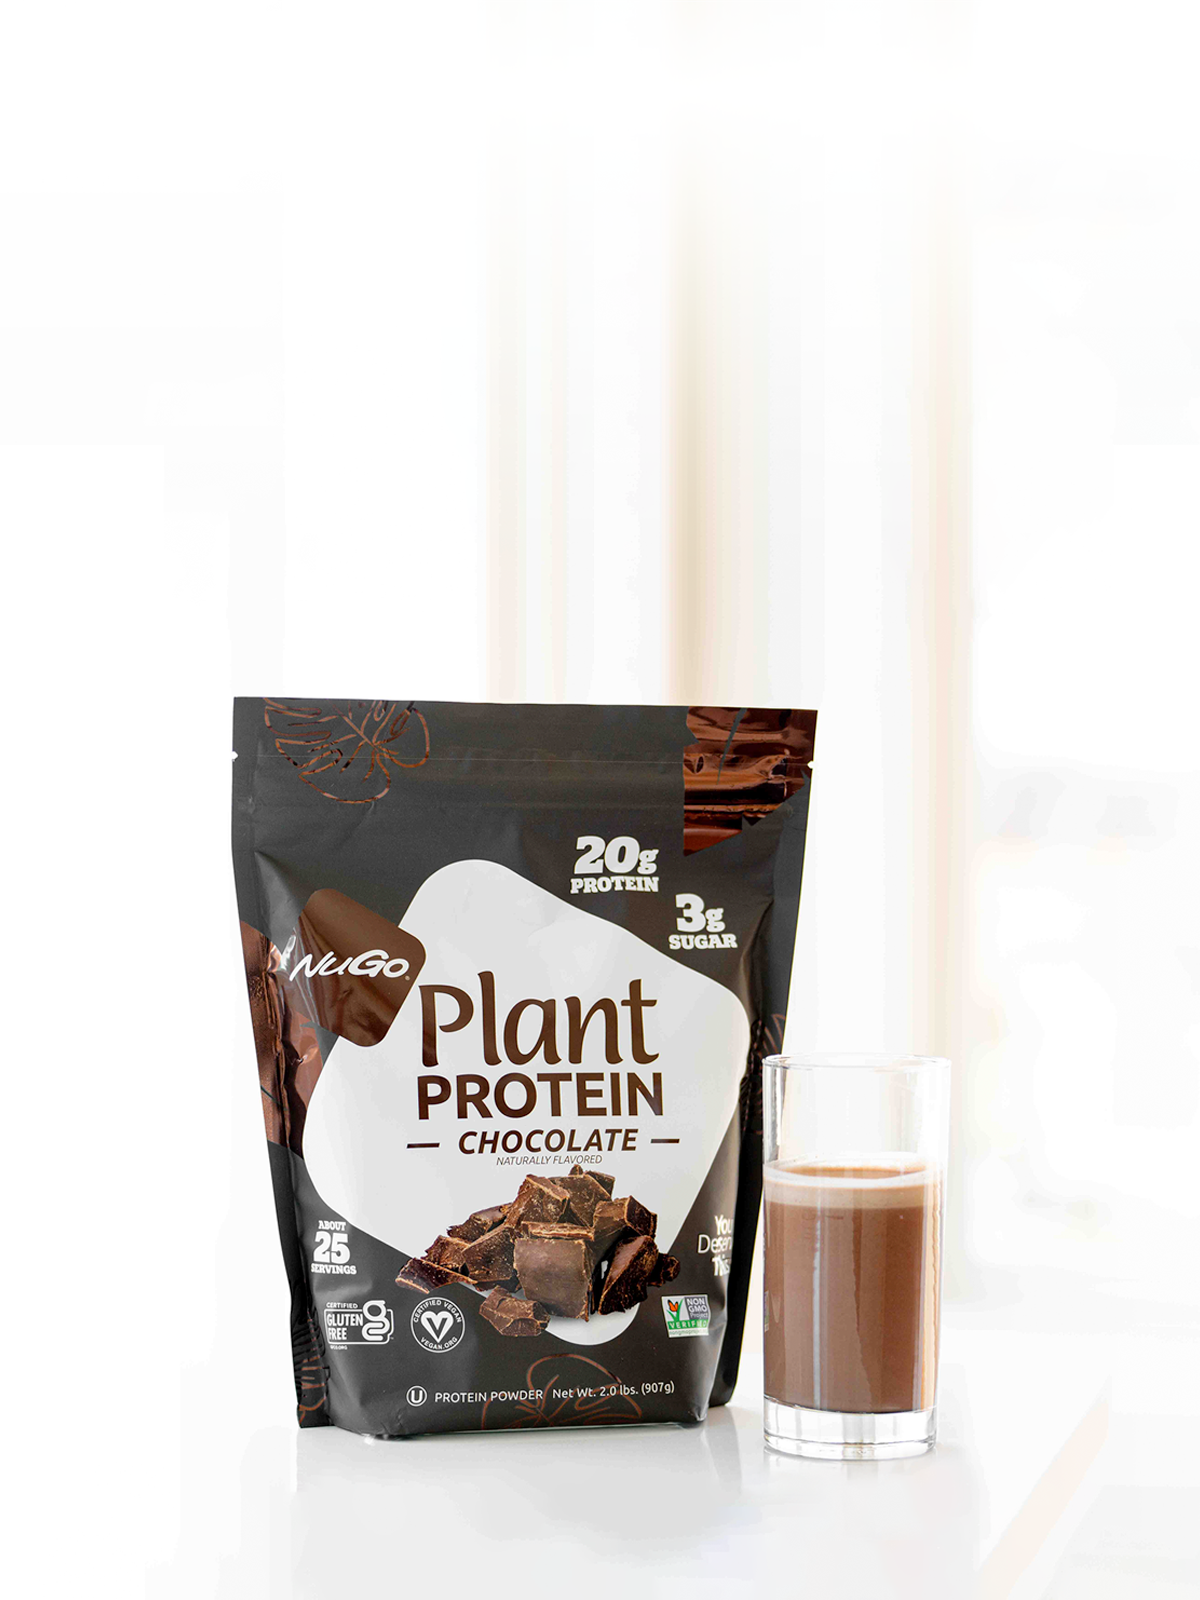 NuGo Protein Powder bag with tall glass of mix to the right